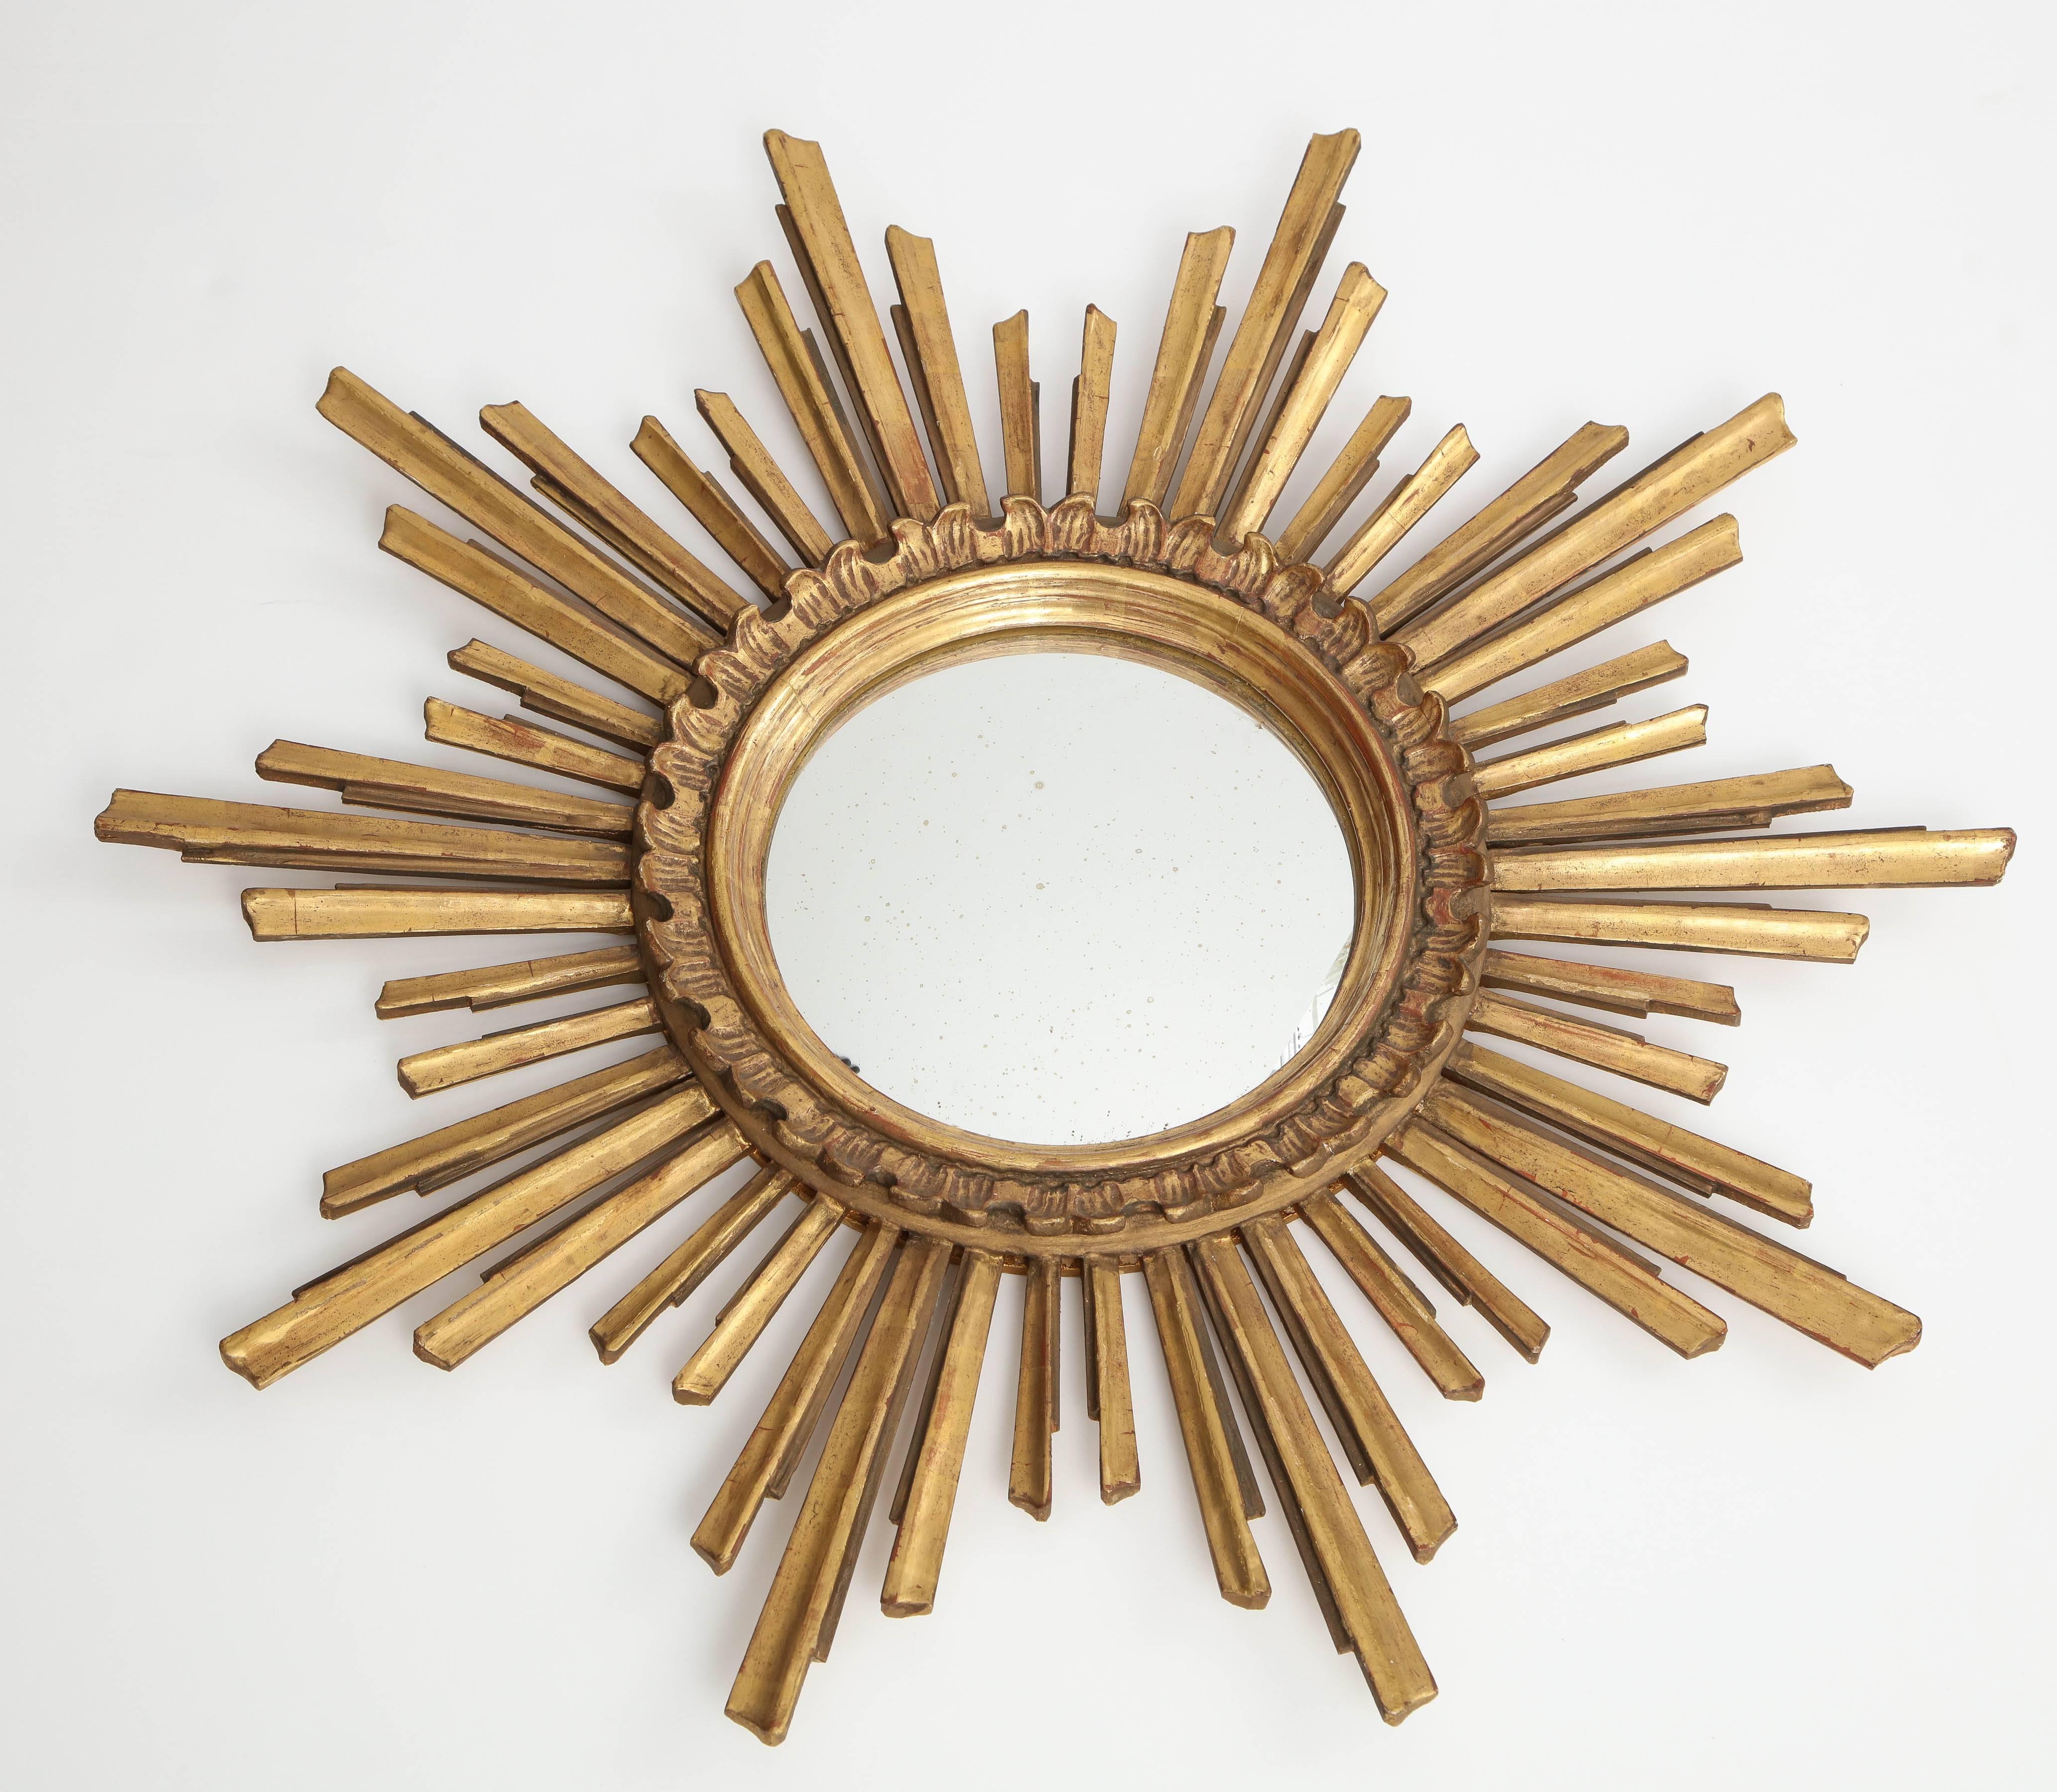 This is a particularly attractive sunburst mirror, with its beautiful patina, variegated rays and double molded centre ring. Made in France in the 1970s.